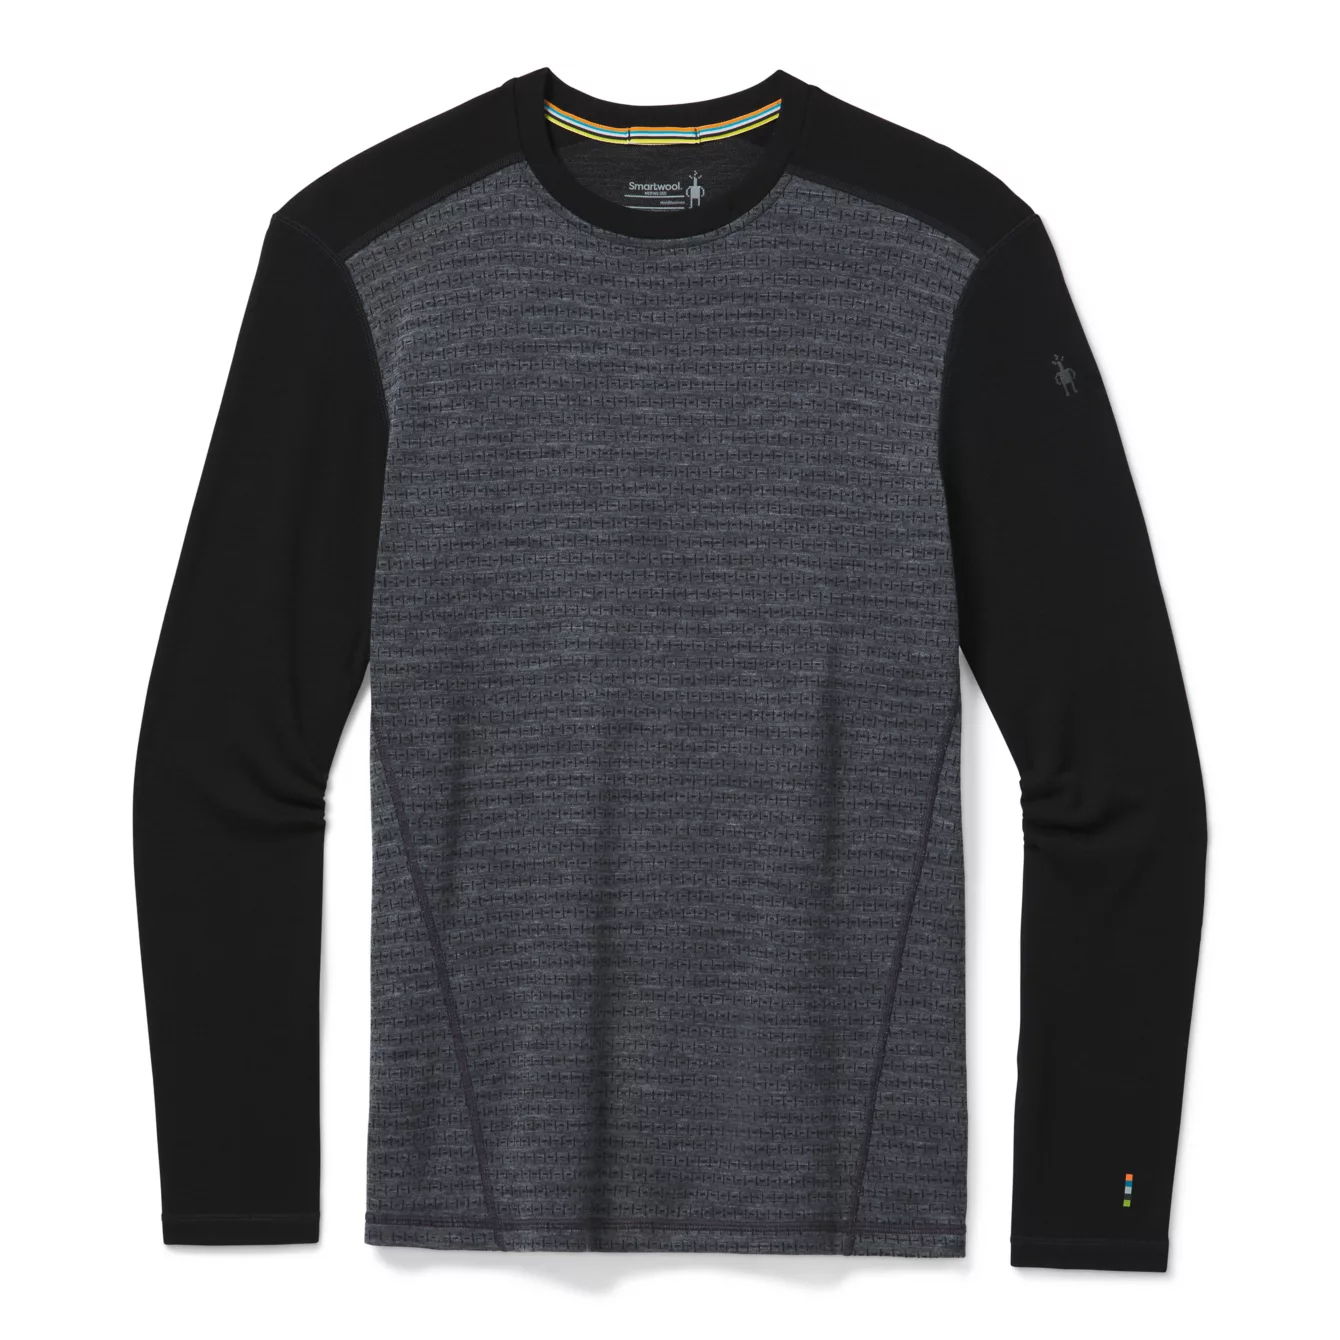 https://activejunky-cdn.s3.amazonaws.com/aj-content/smartwool-Merino-250-Base-Layer-Pattern-Crew-2.png